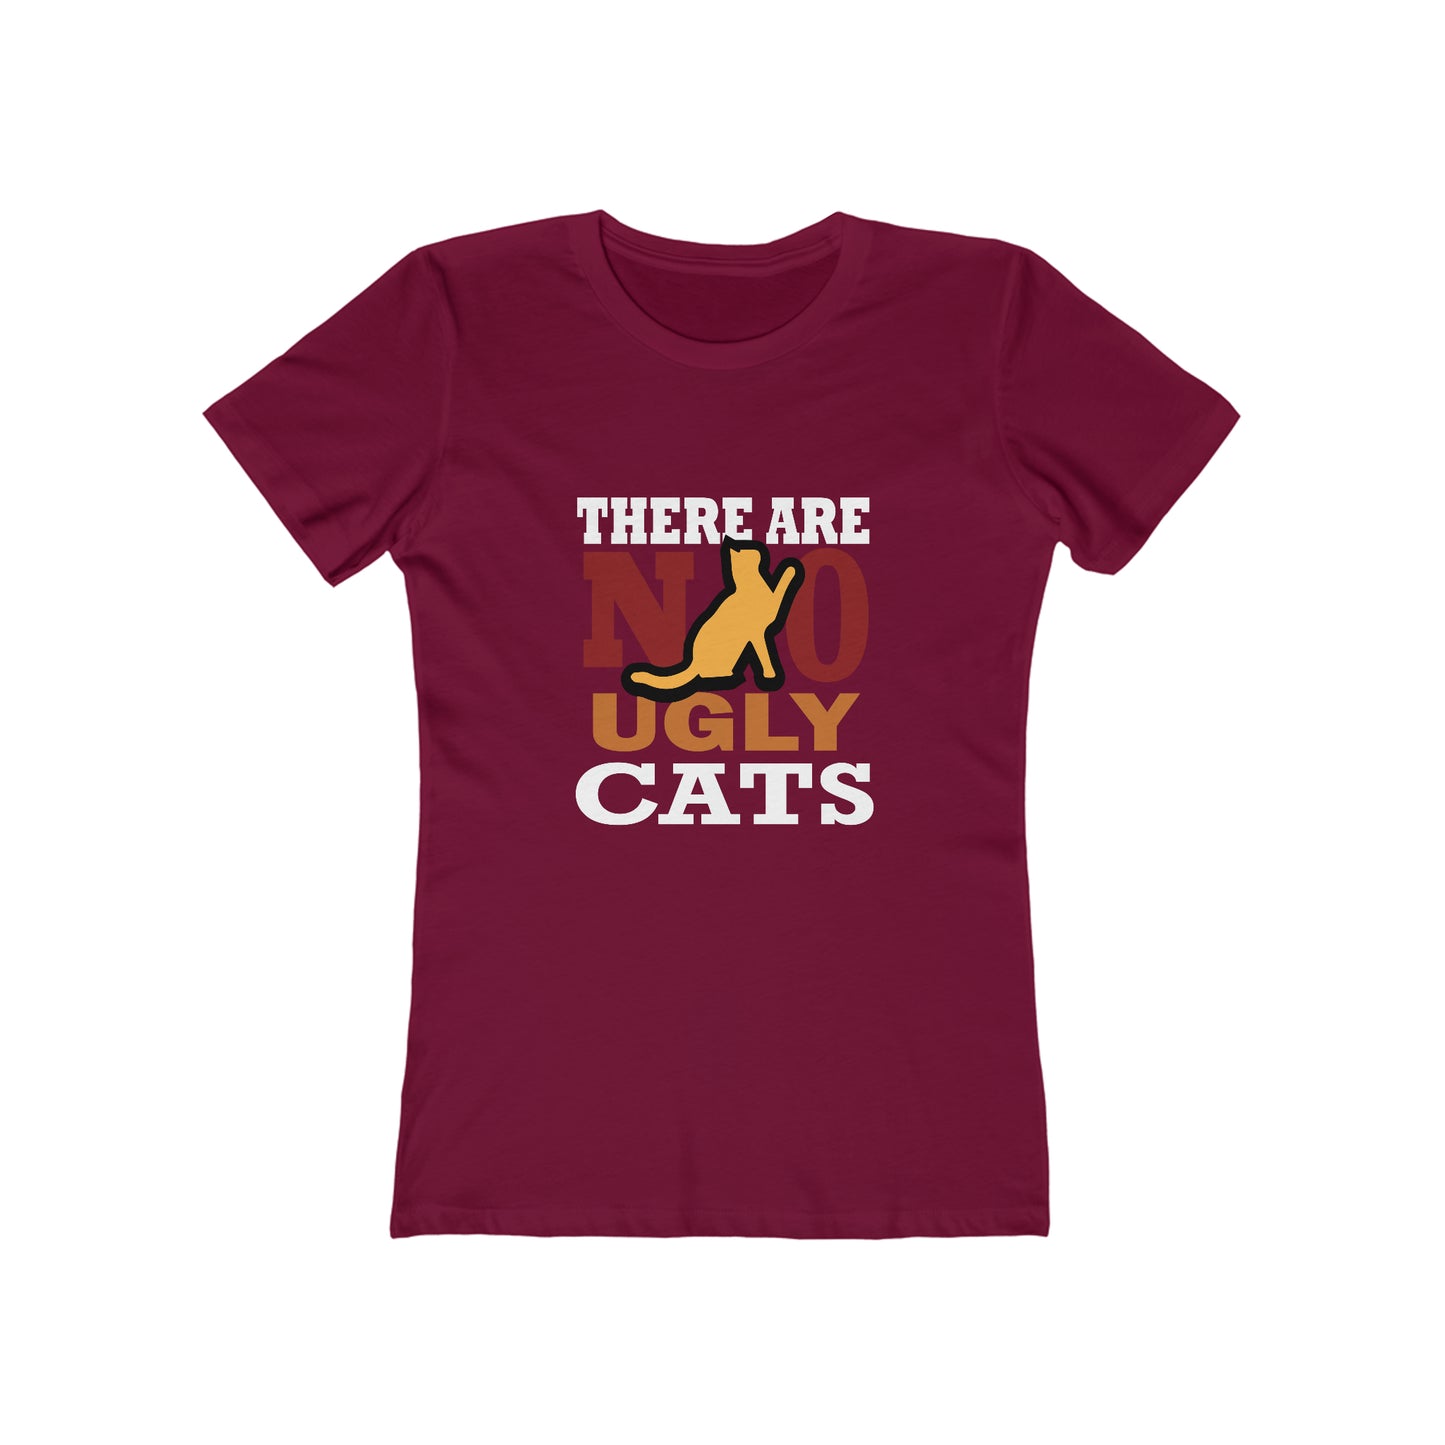 There Are No Ugly Cats - Women's T-shirt